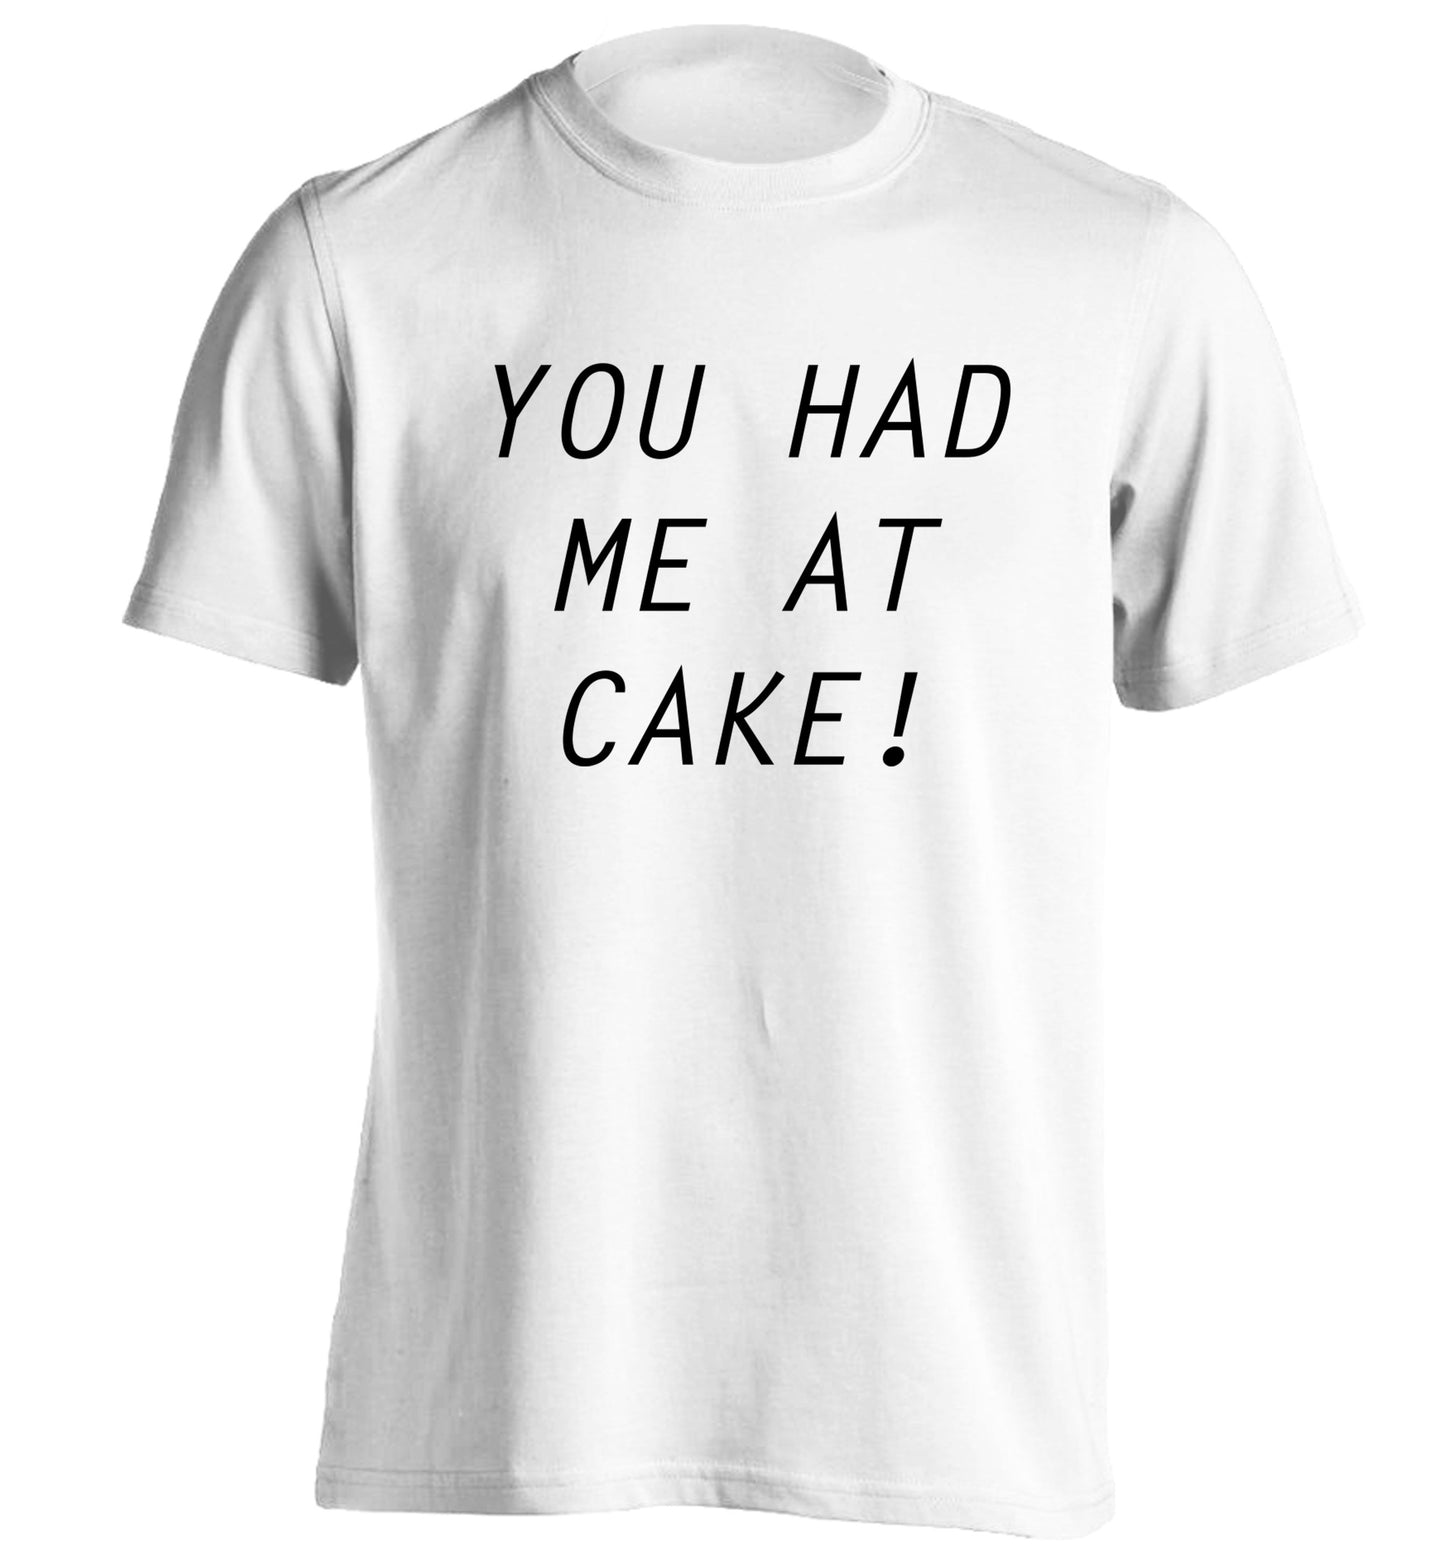 You had me at cake adults unisex white Tshirt 2XL